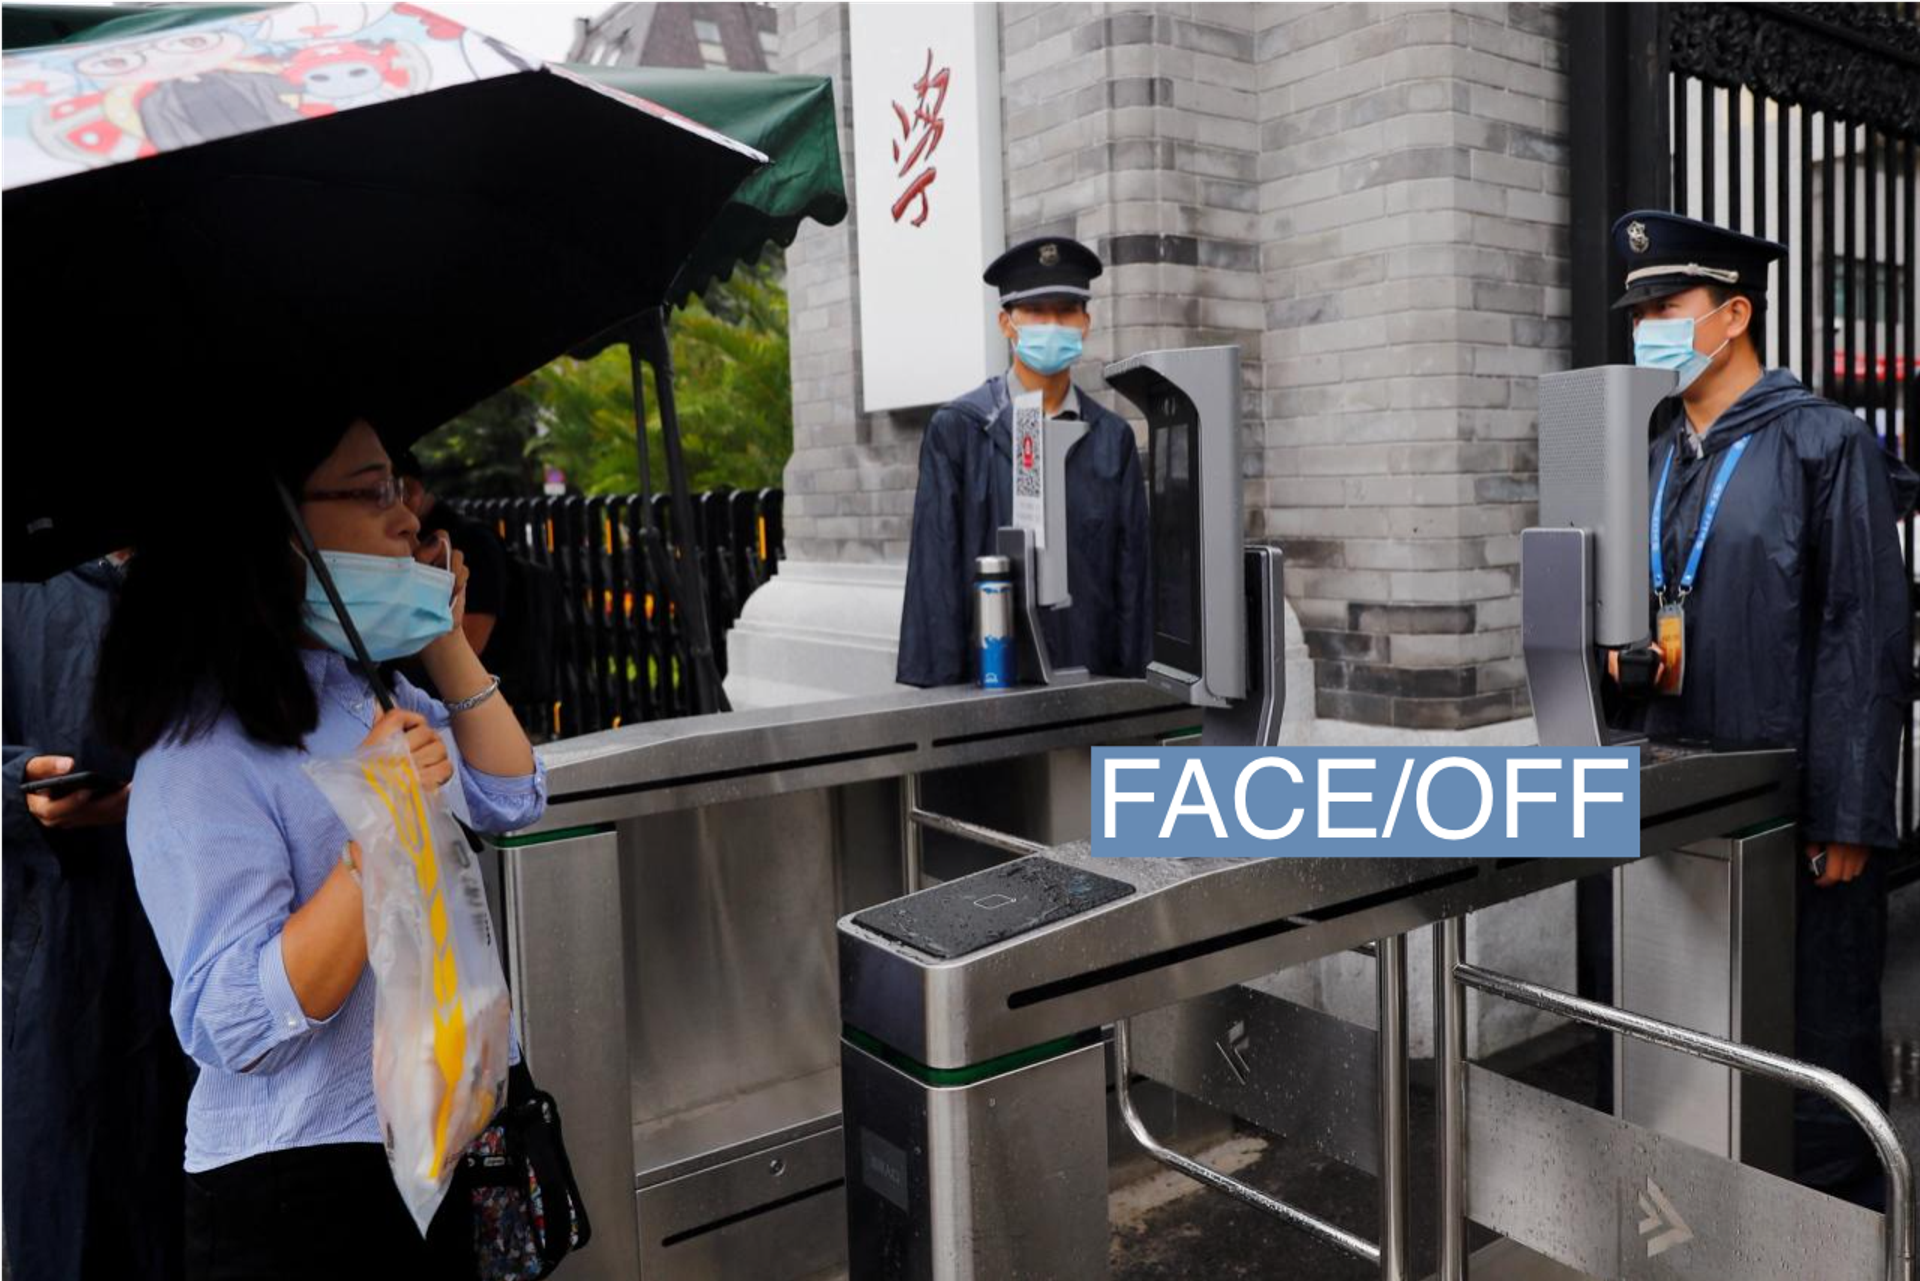 Facial recognition in China